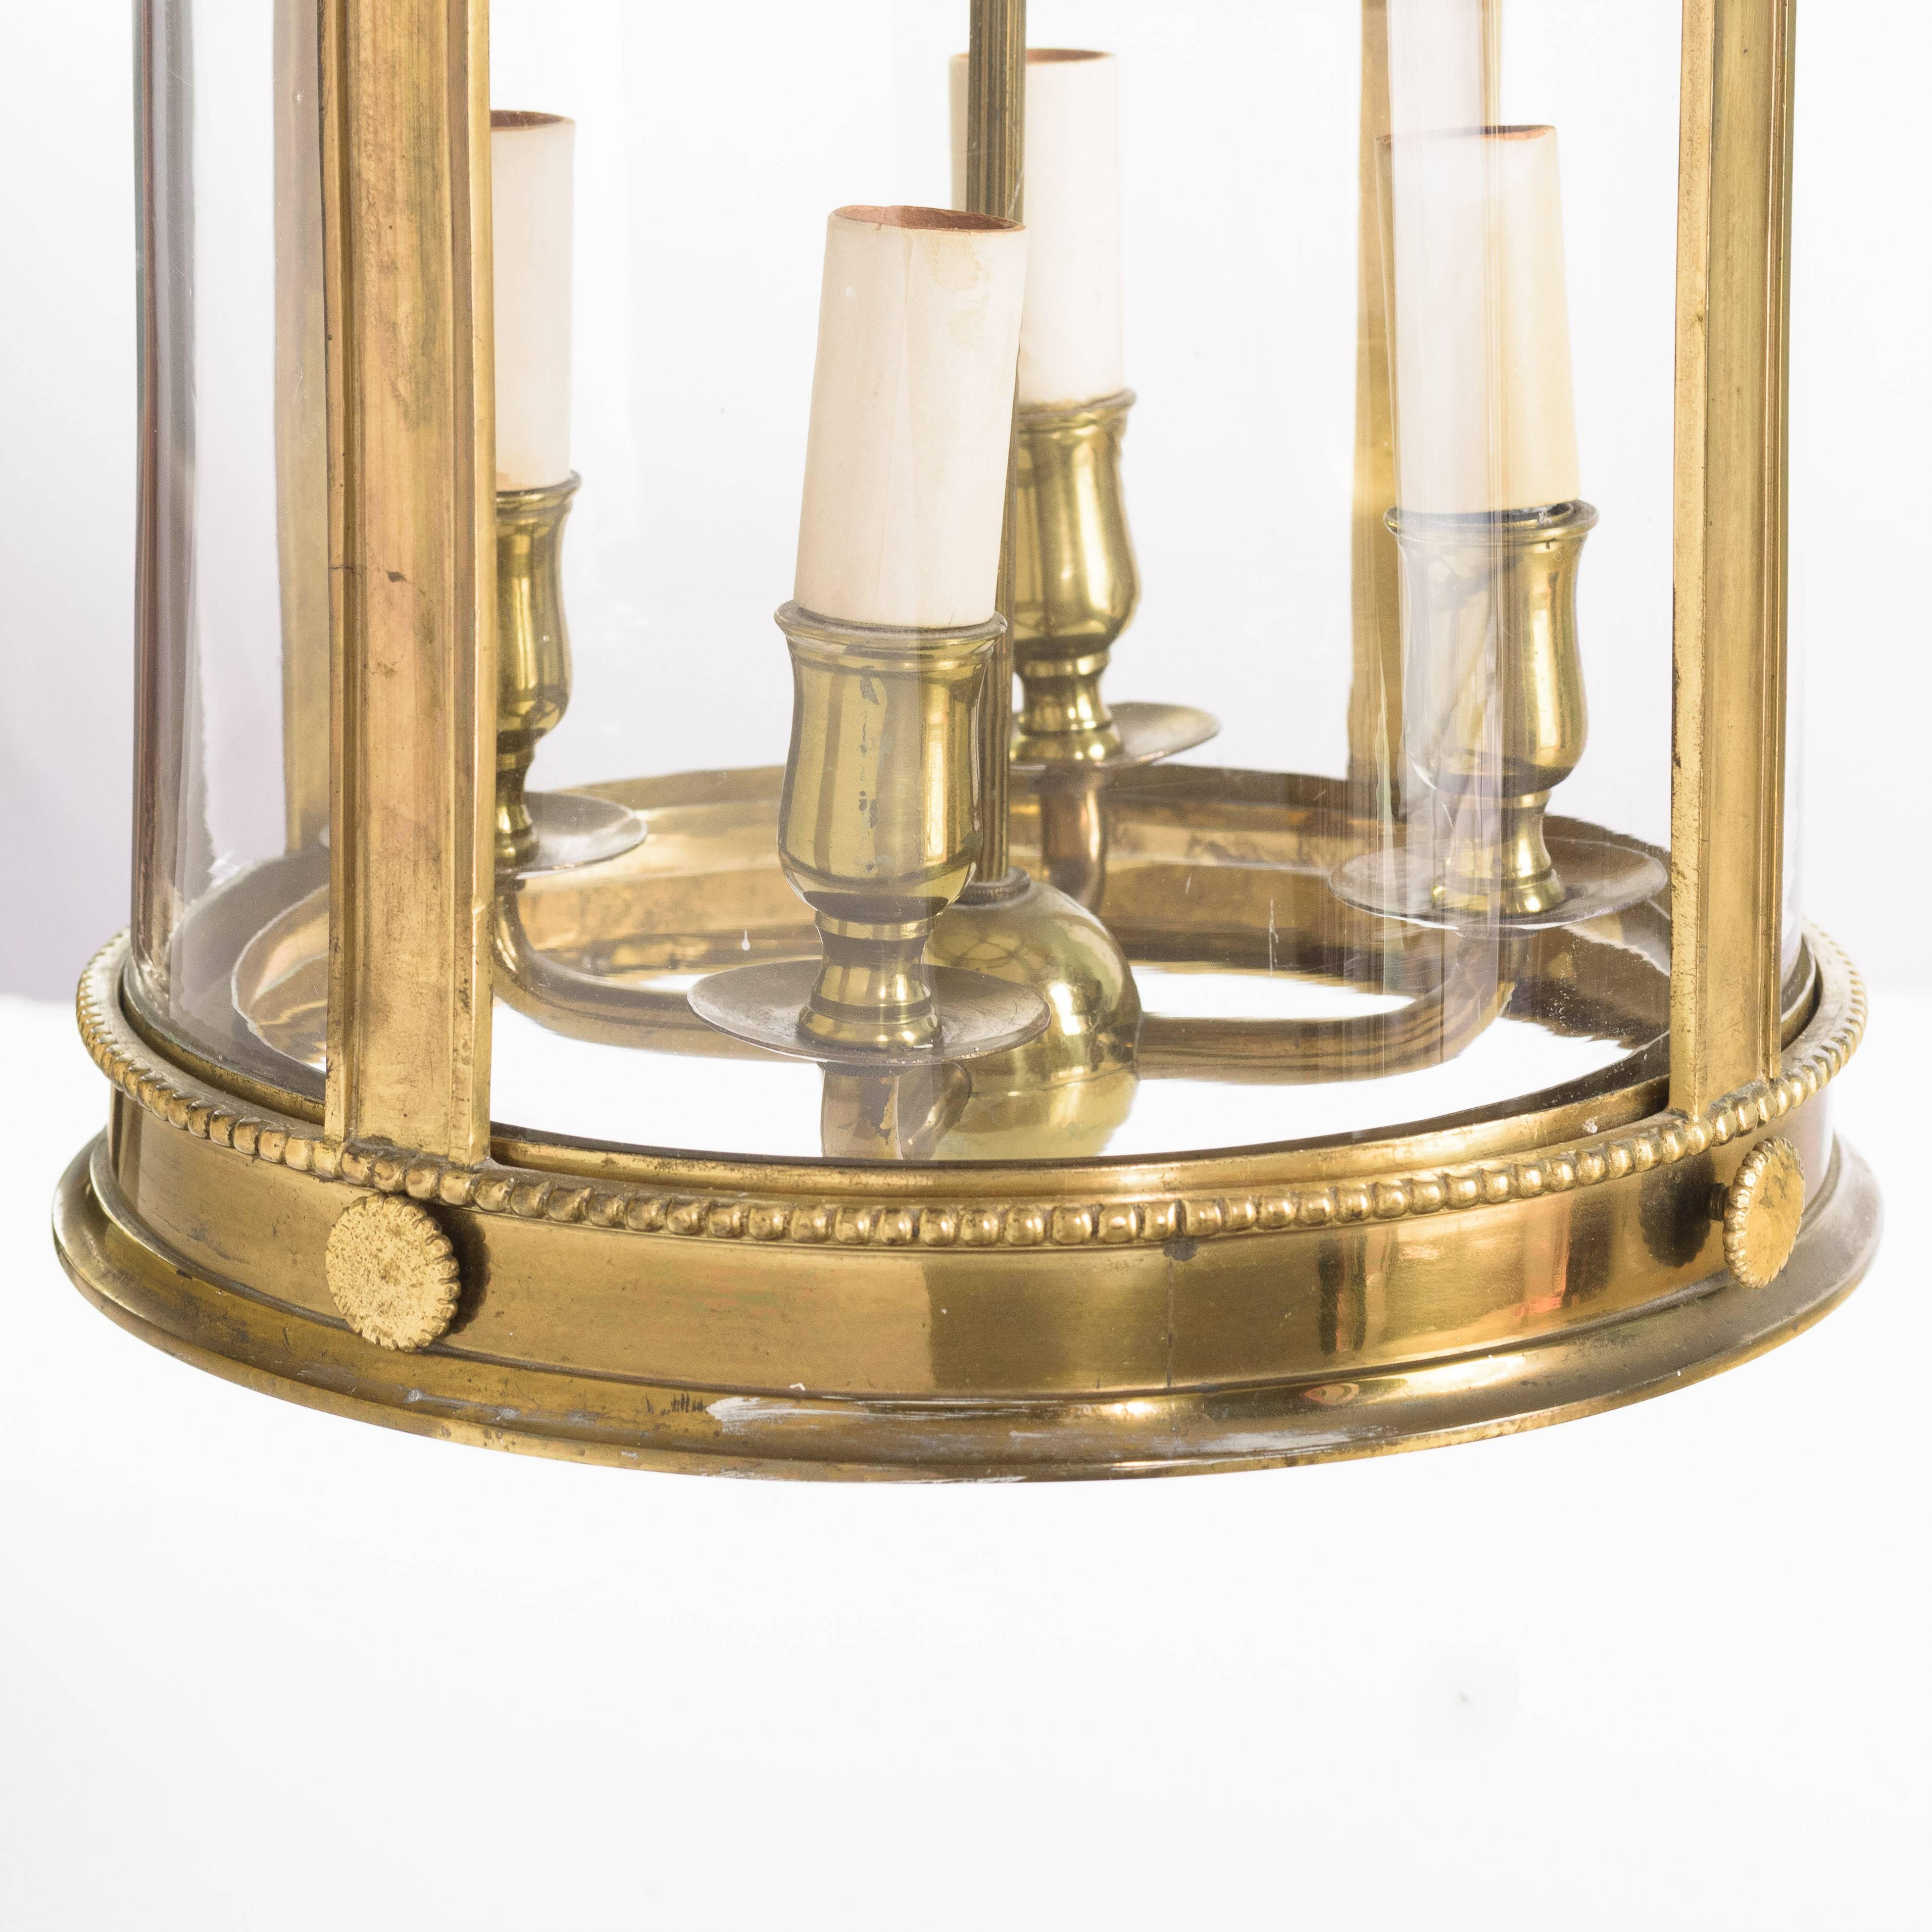 A Louis XVI style brass lantern, 20th century, of cylindrical form hung with garlands of flowers headed by flaming urn finials, with four-light suspended fitting within.

The lantern is in good working order having been rewired and is complete with